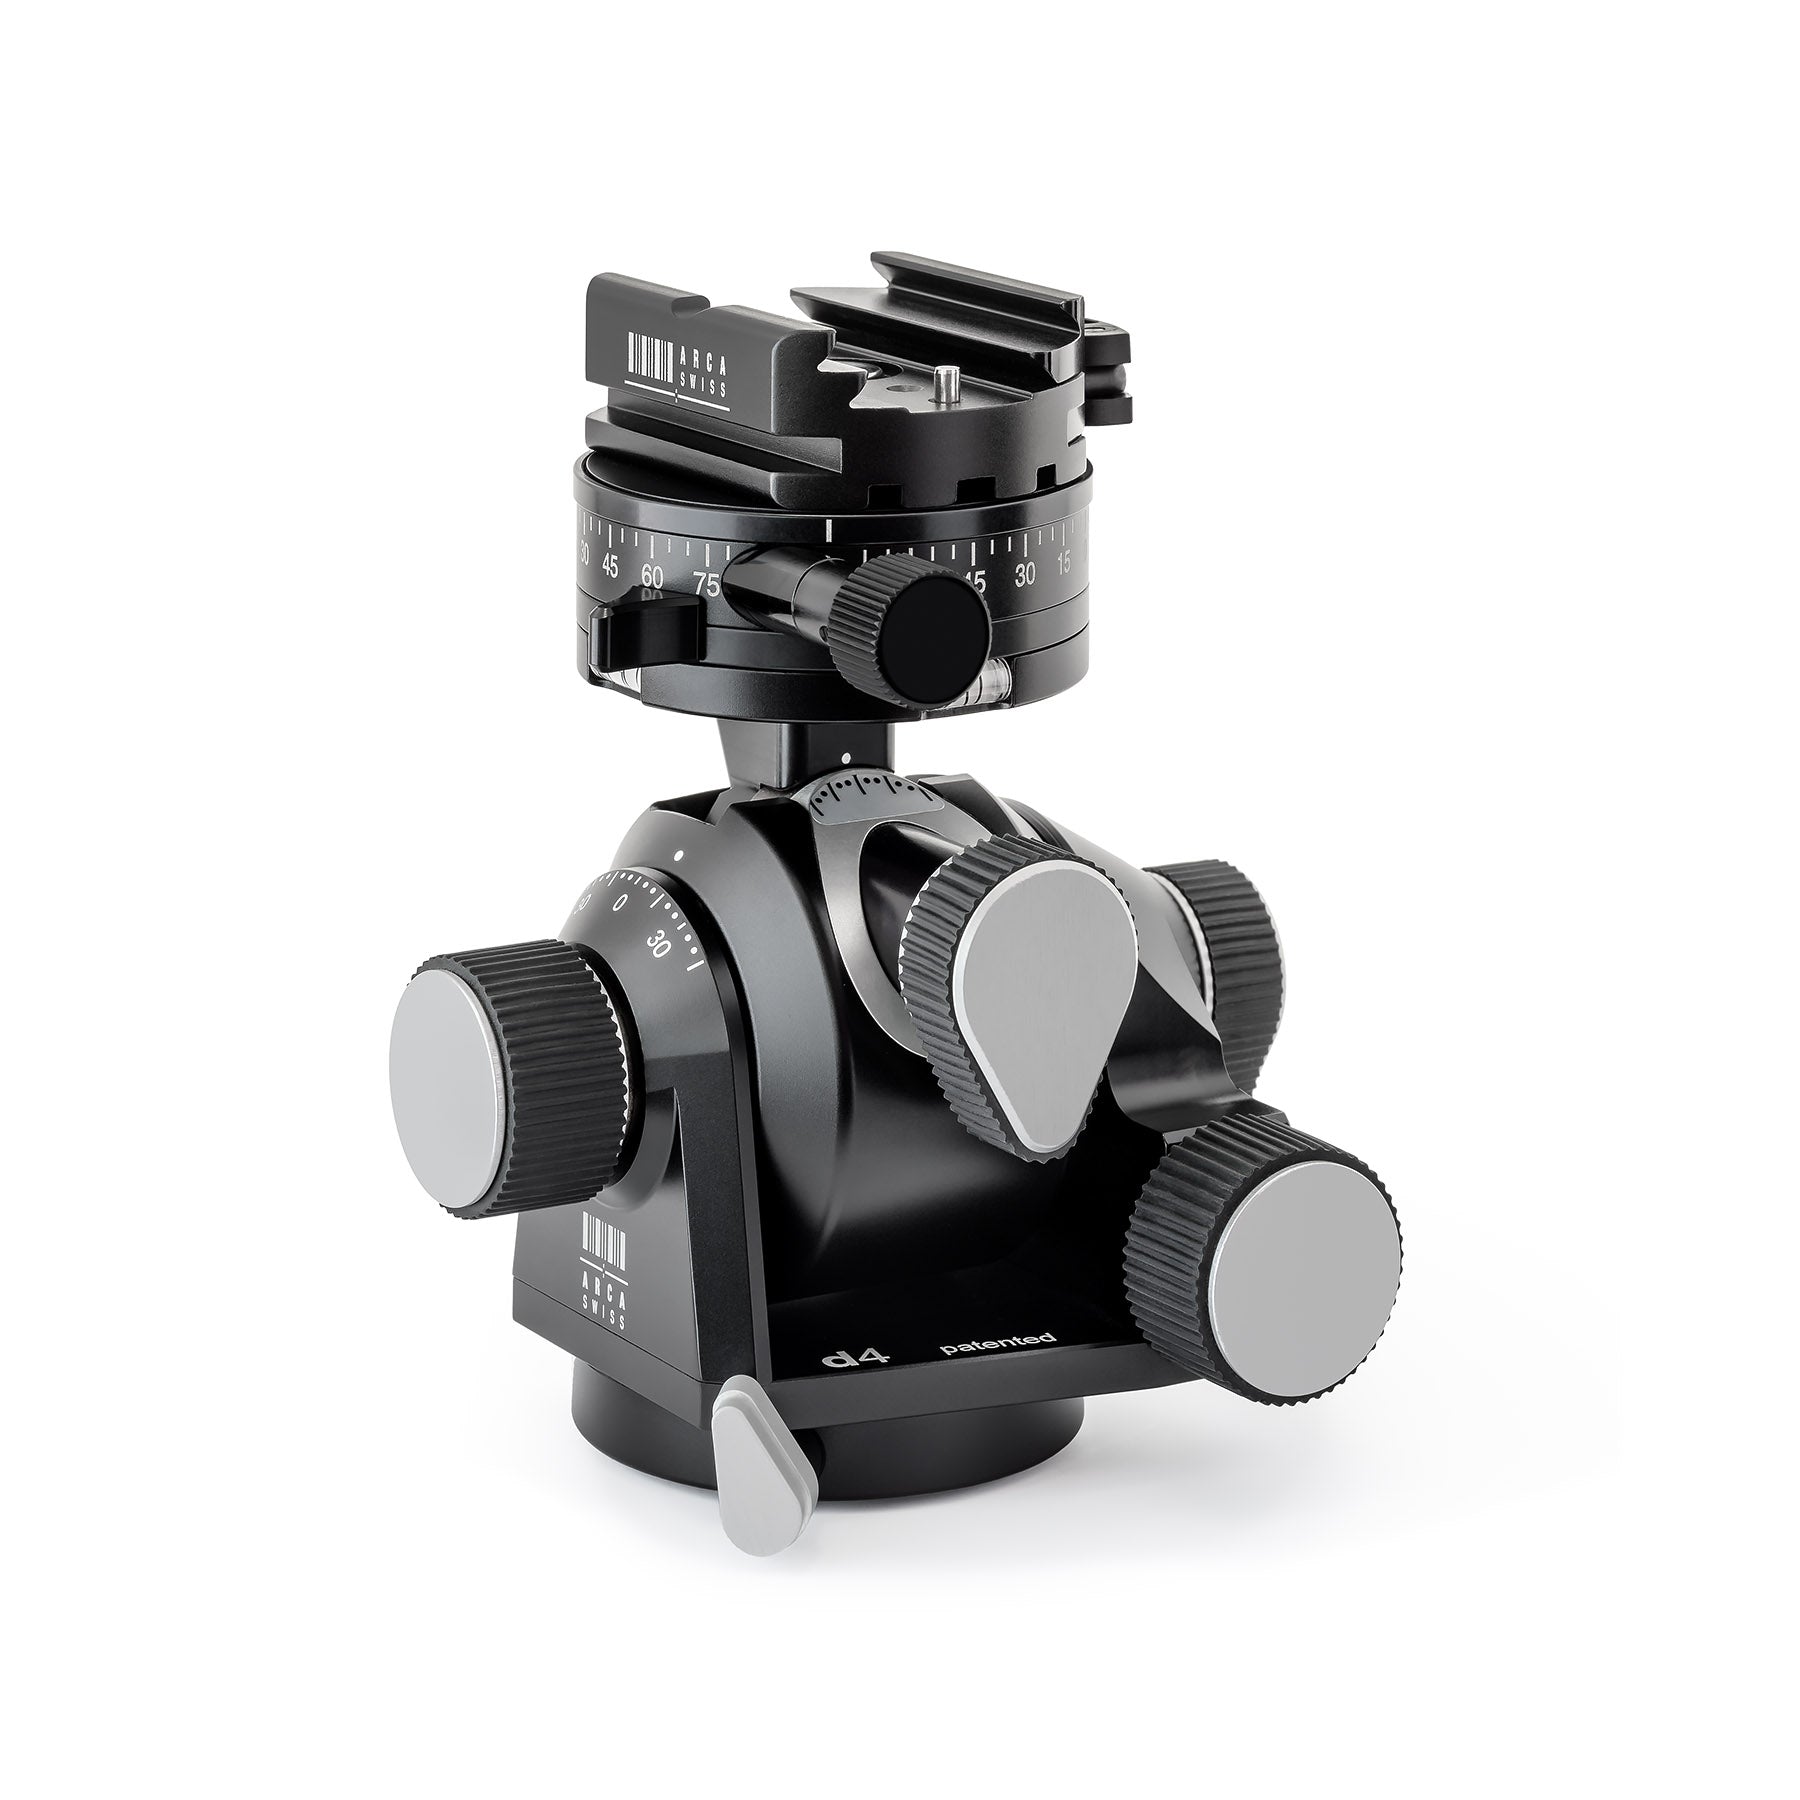 d4 gp (geared with geared panning) tripod head